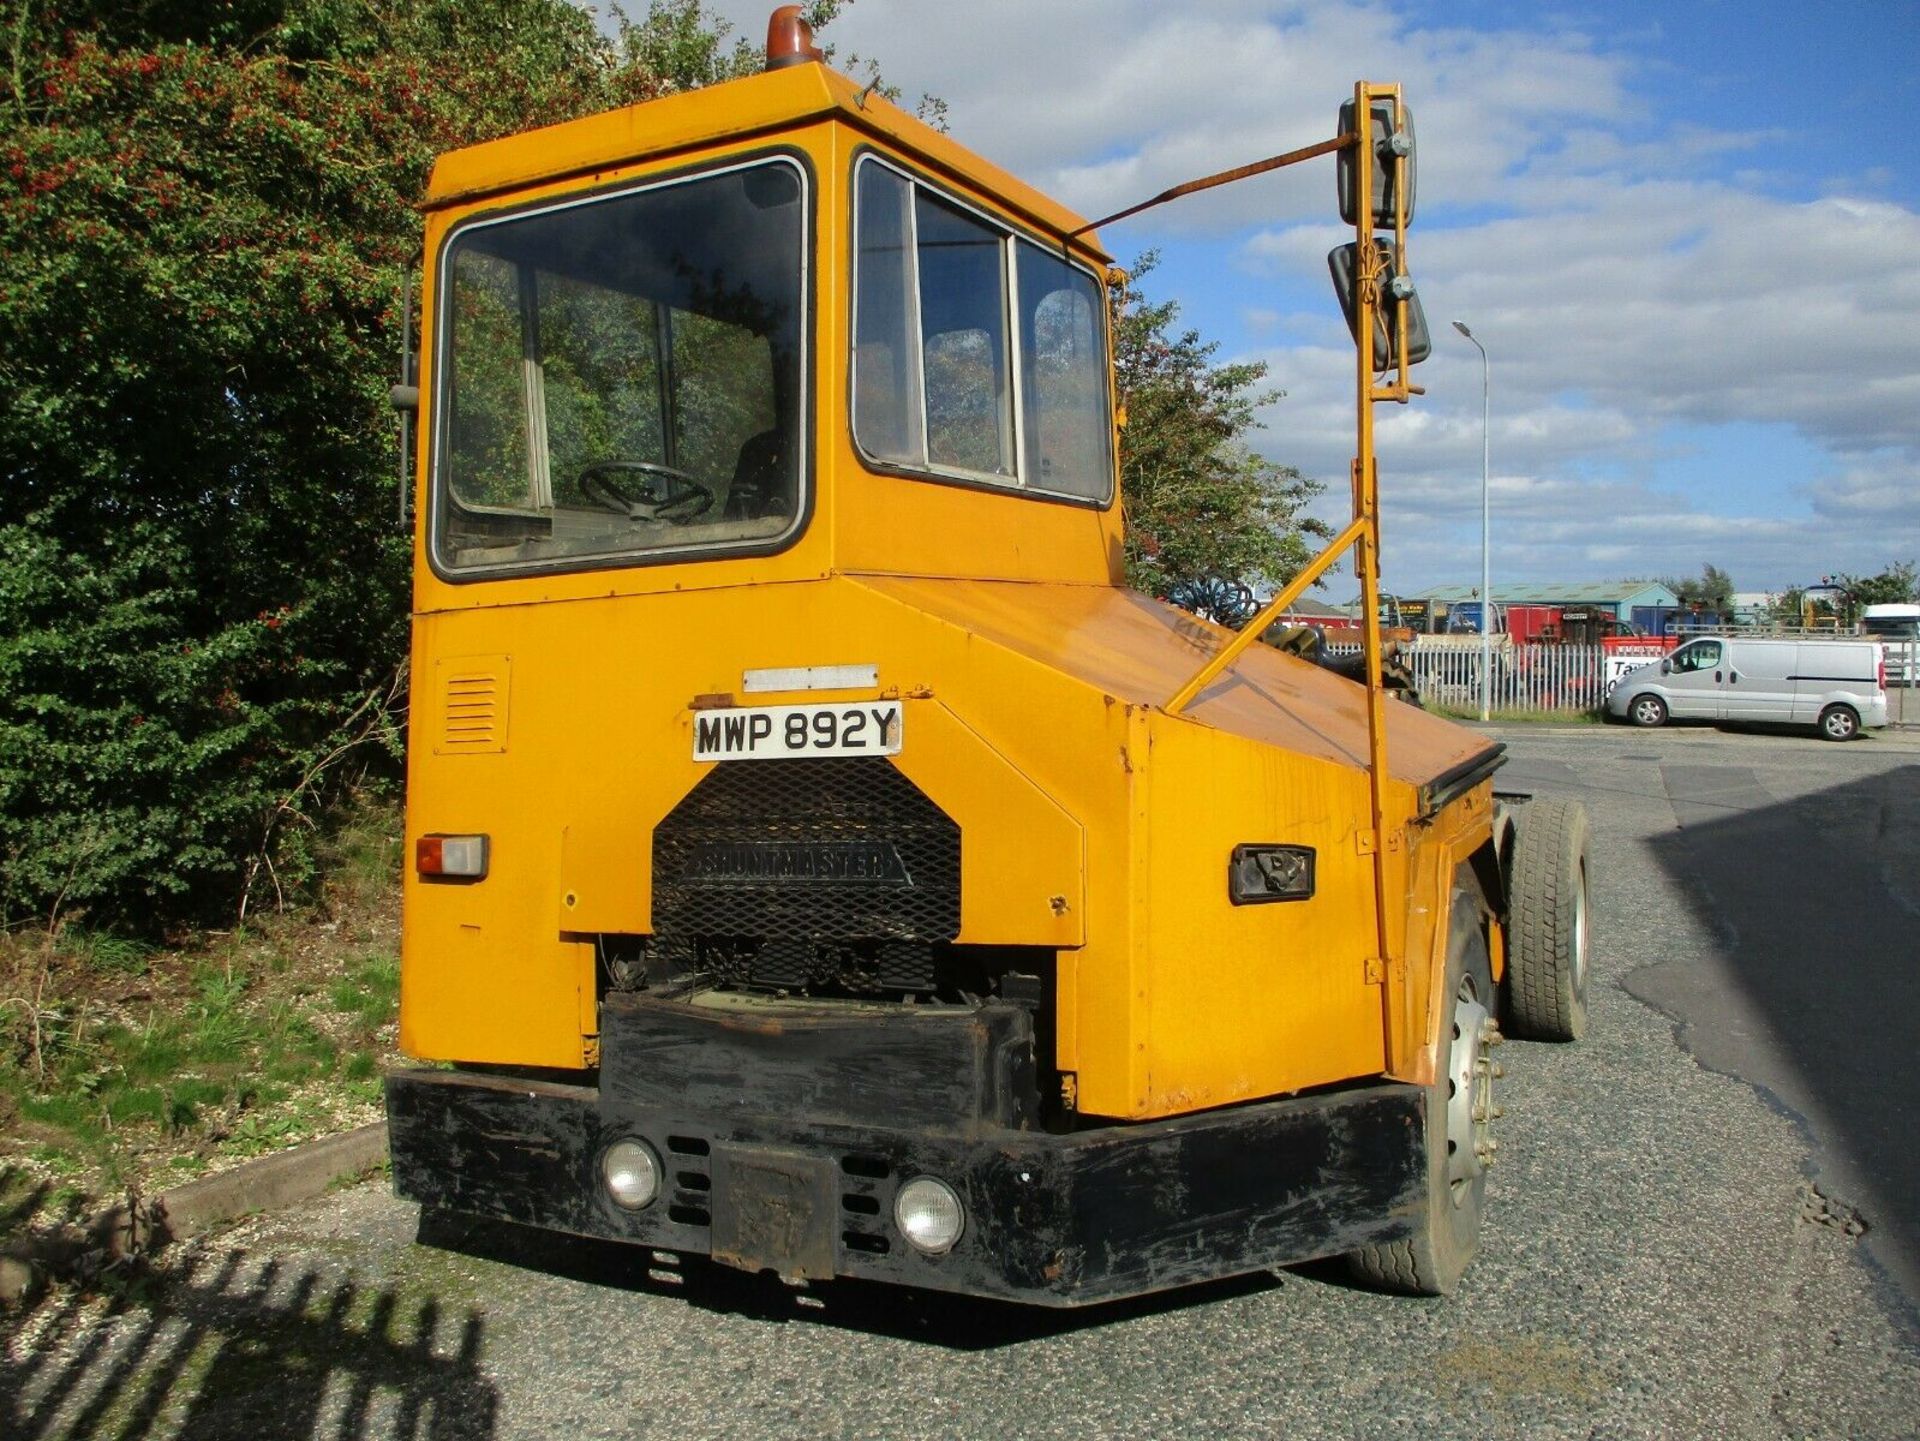 Reliance Dock spotter shunter tow tug tractor unit - Image 8 of 10